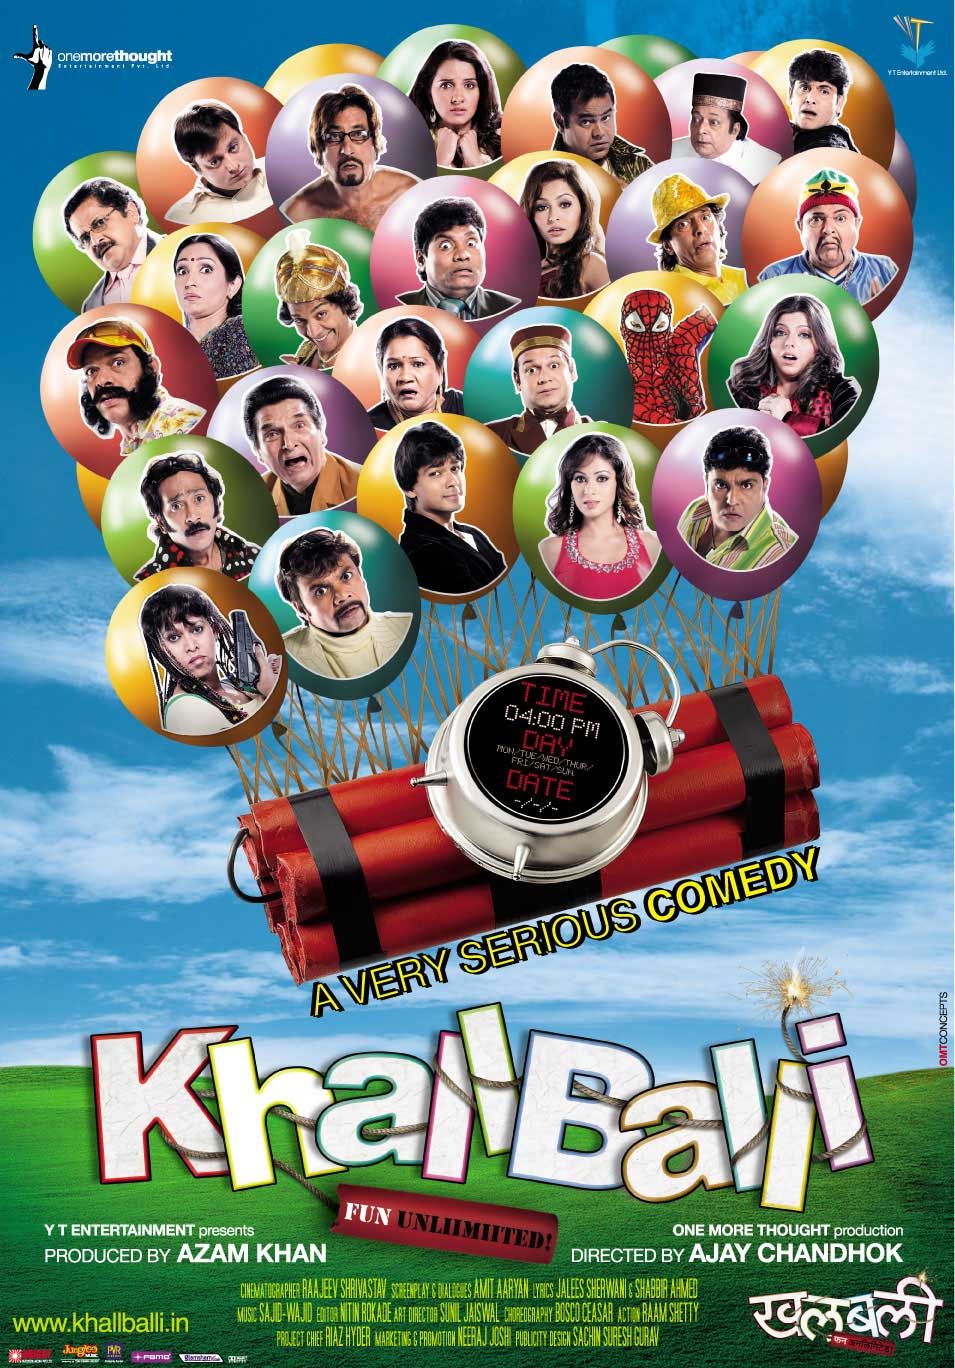 Extra Large Movie Poster Image for Khallballi: Fun Unlimited (#4 of 10)